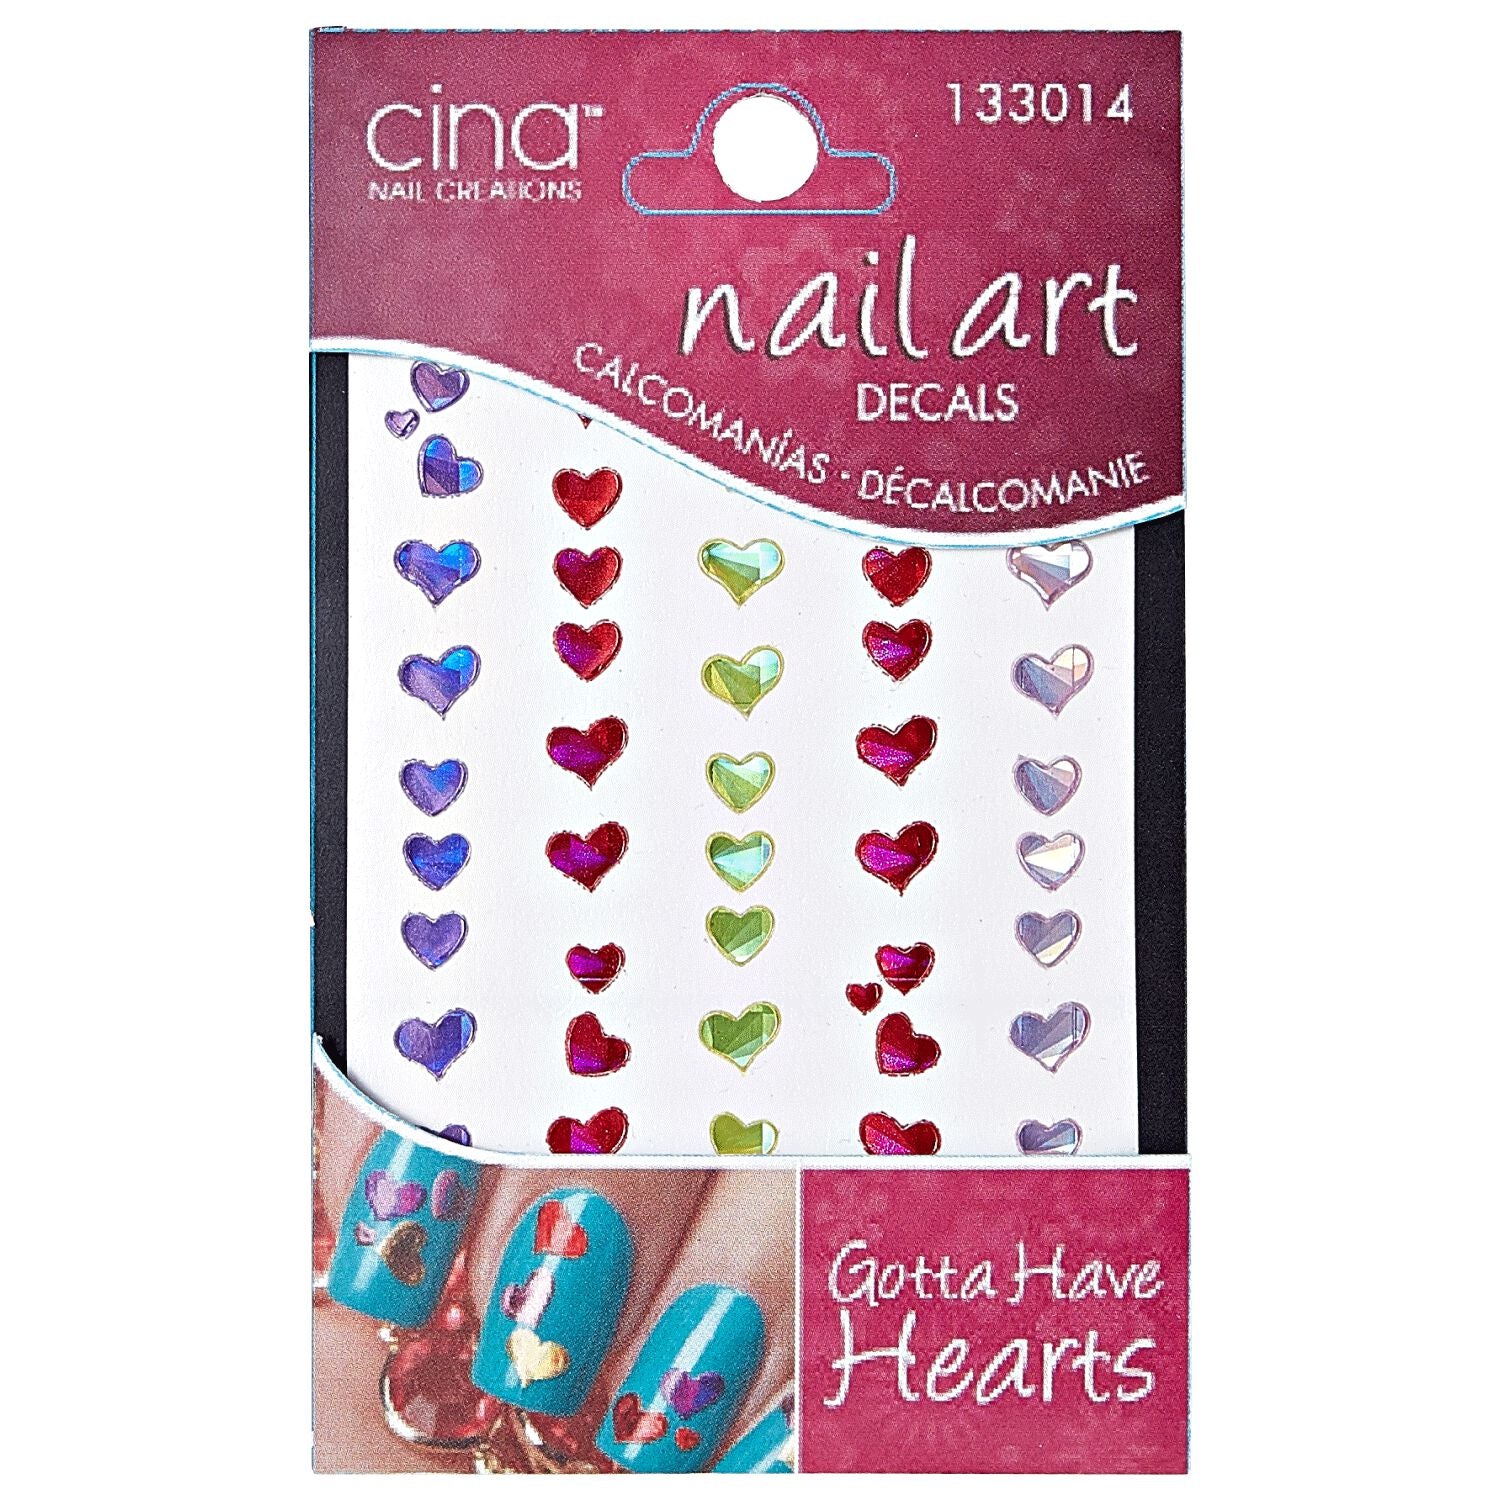 Cina Nail Creations Art Jewelry Decals Gotta Have Hearts